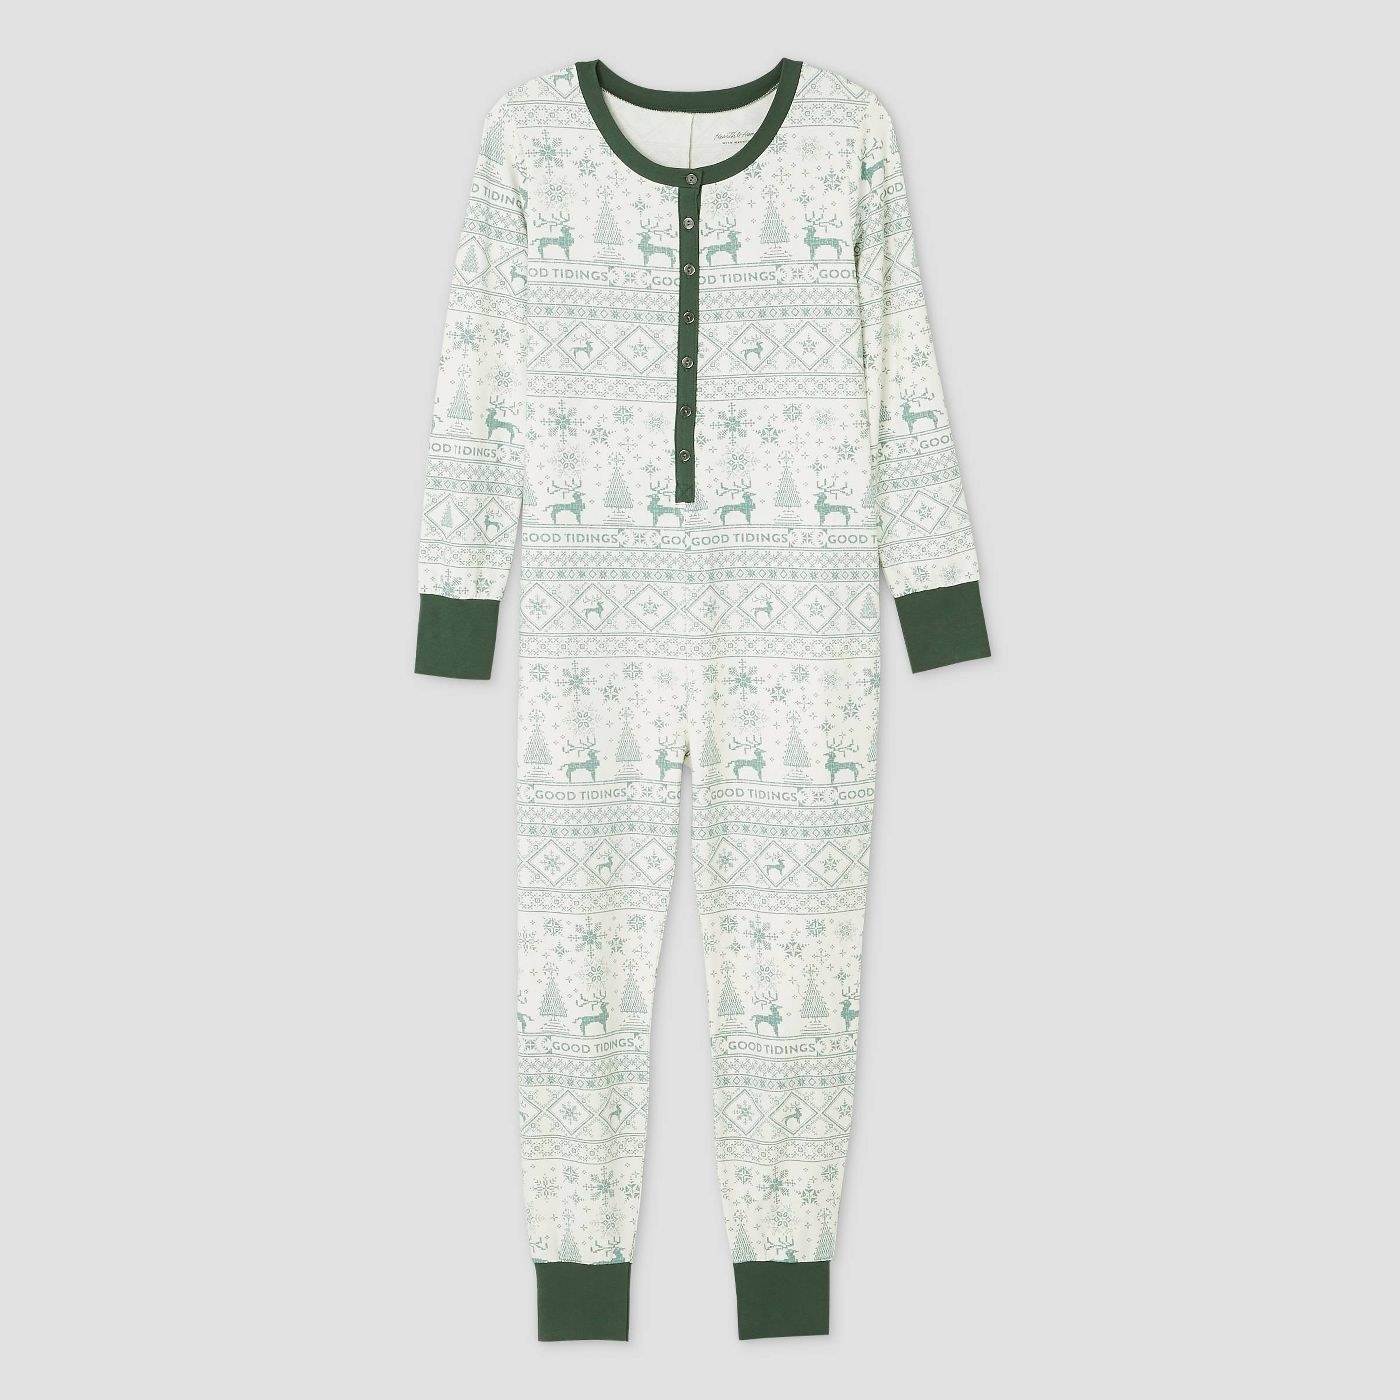 The green-and-white onesie 